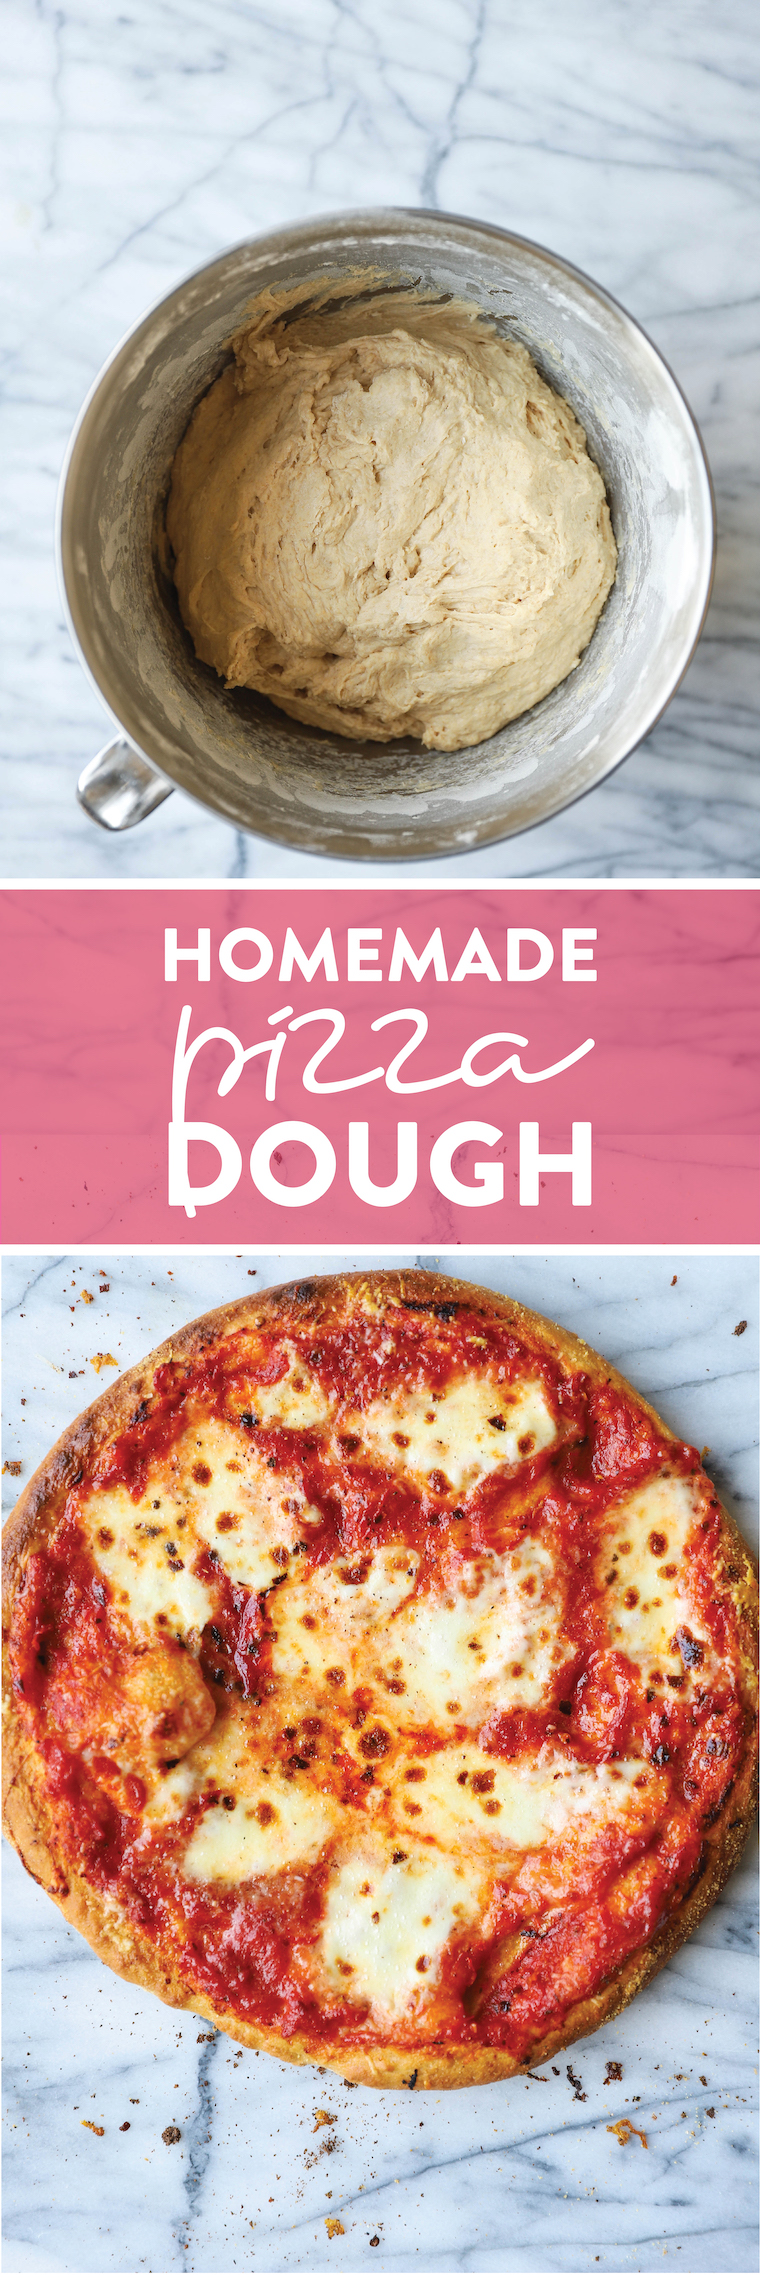 Homemade Pizza Dough - So much easier to make than you think, and it's such a game-changer! Perfect for pizza night and it's freezer-friendly!